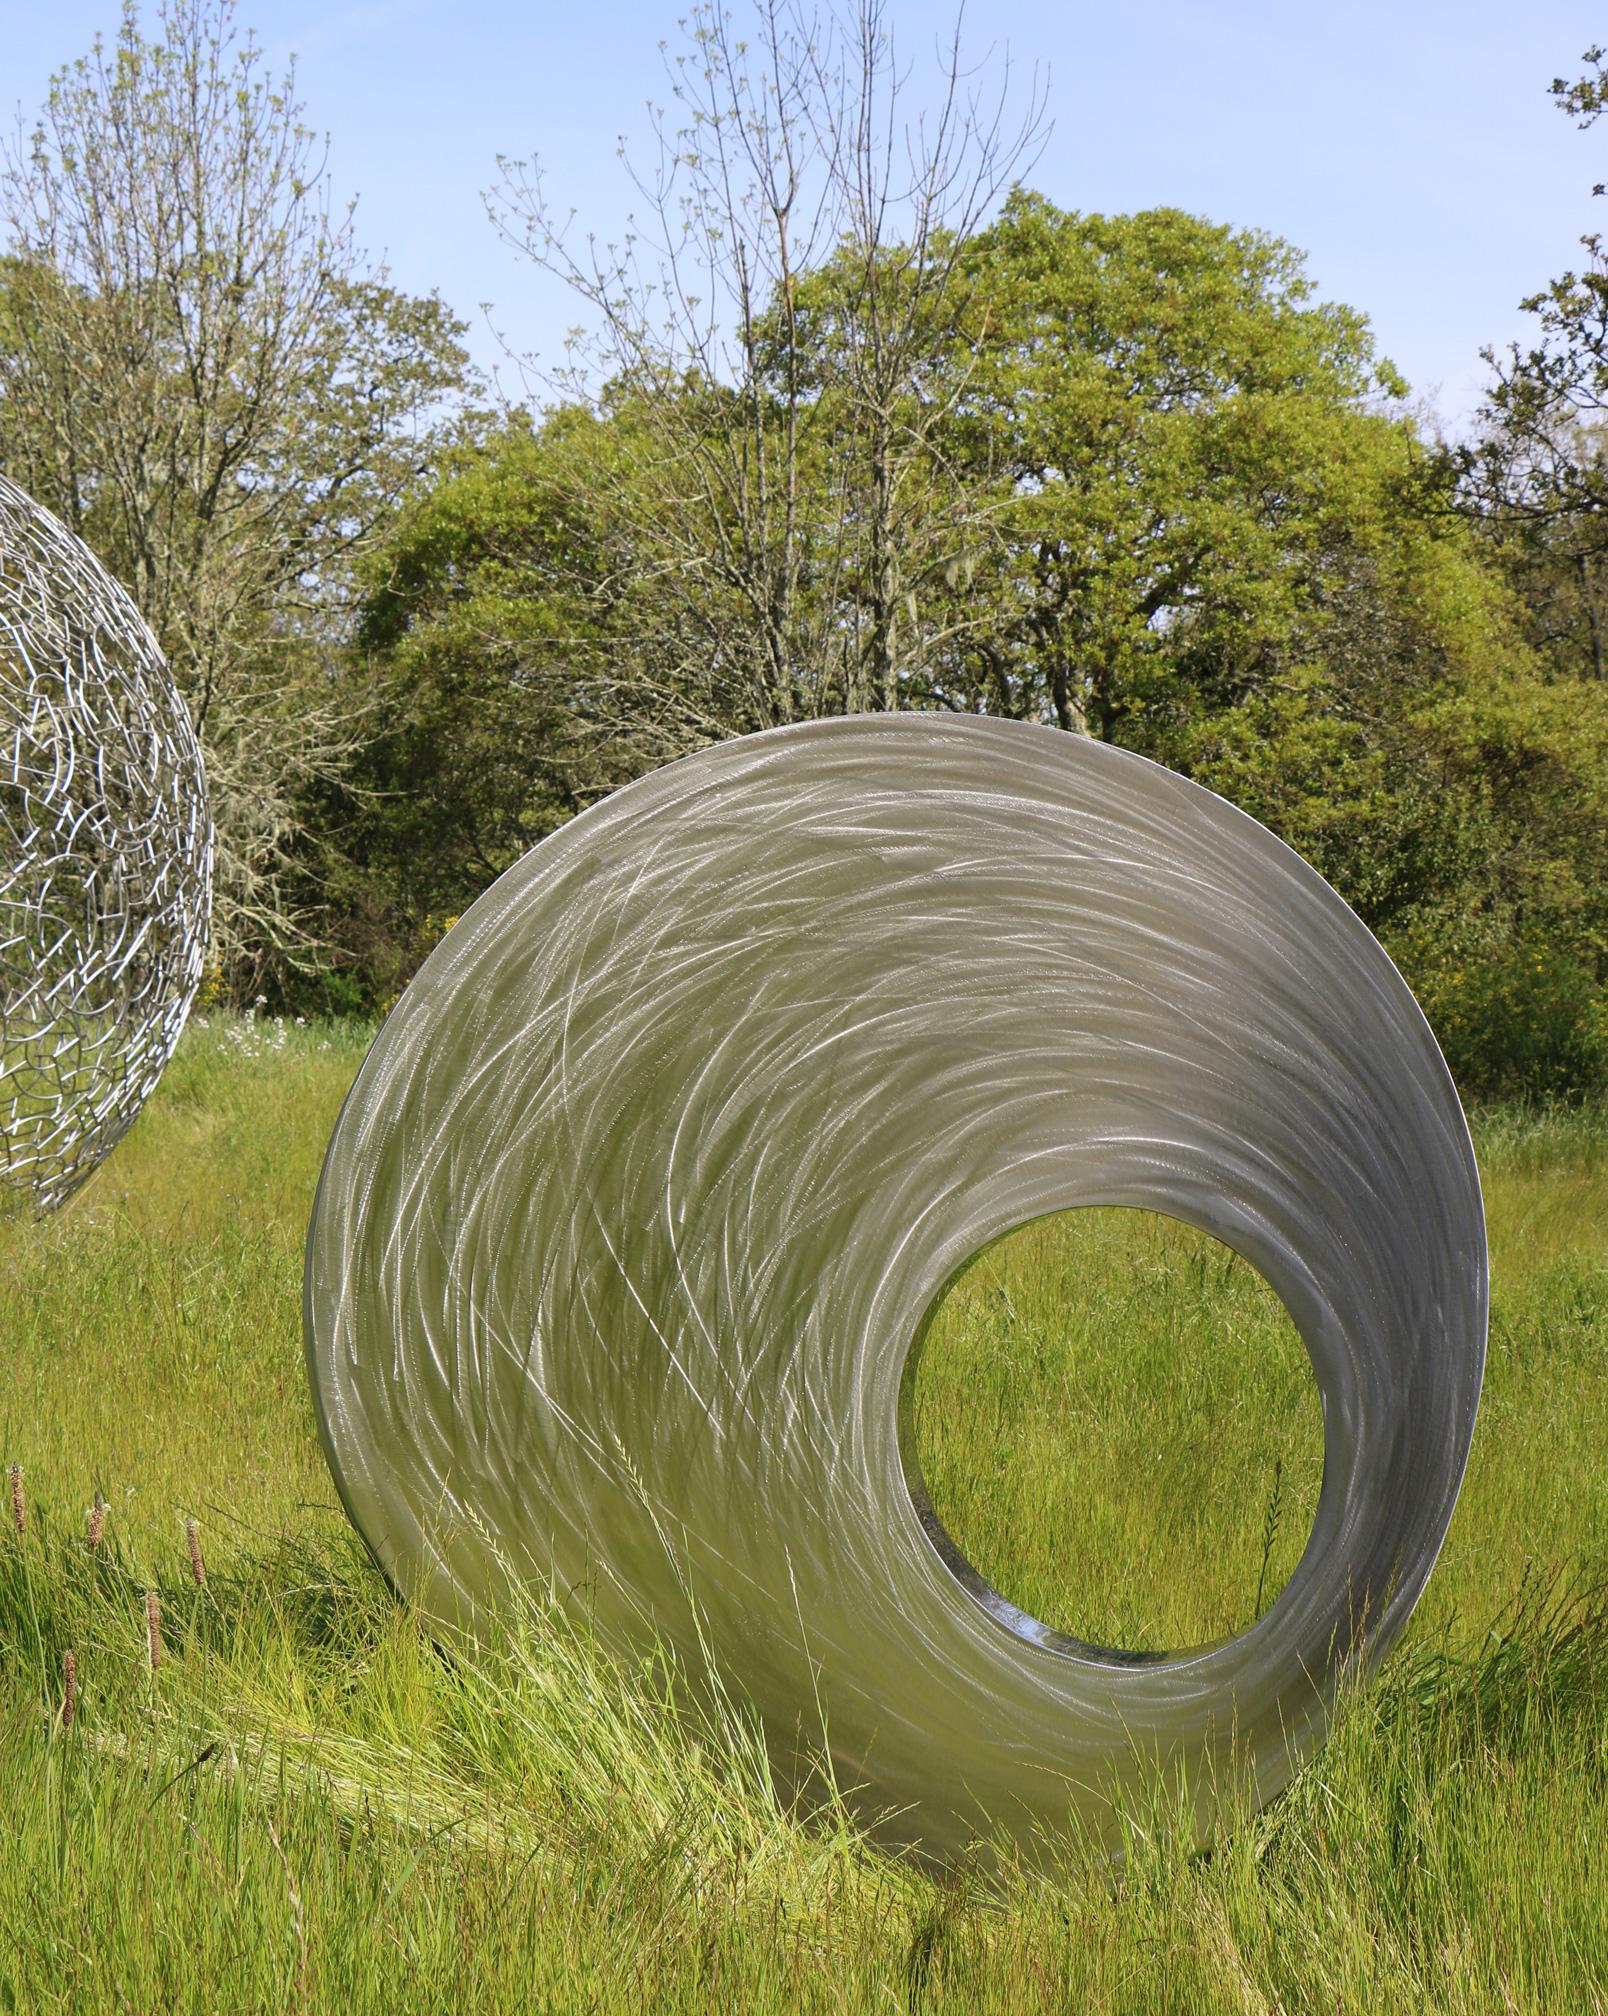 This stunning interactive kinetic sculpture in stainless steel easily rotates when pushed by hand. The outside surfaces have emphasized grinding marks that contrast beautifully with the highly polished hole in the middle. 

Dimensions shown are the